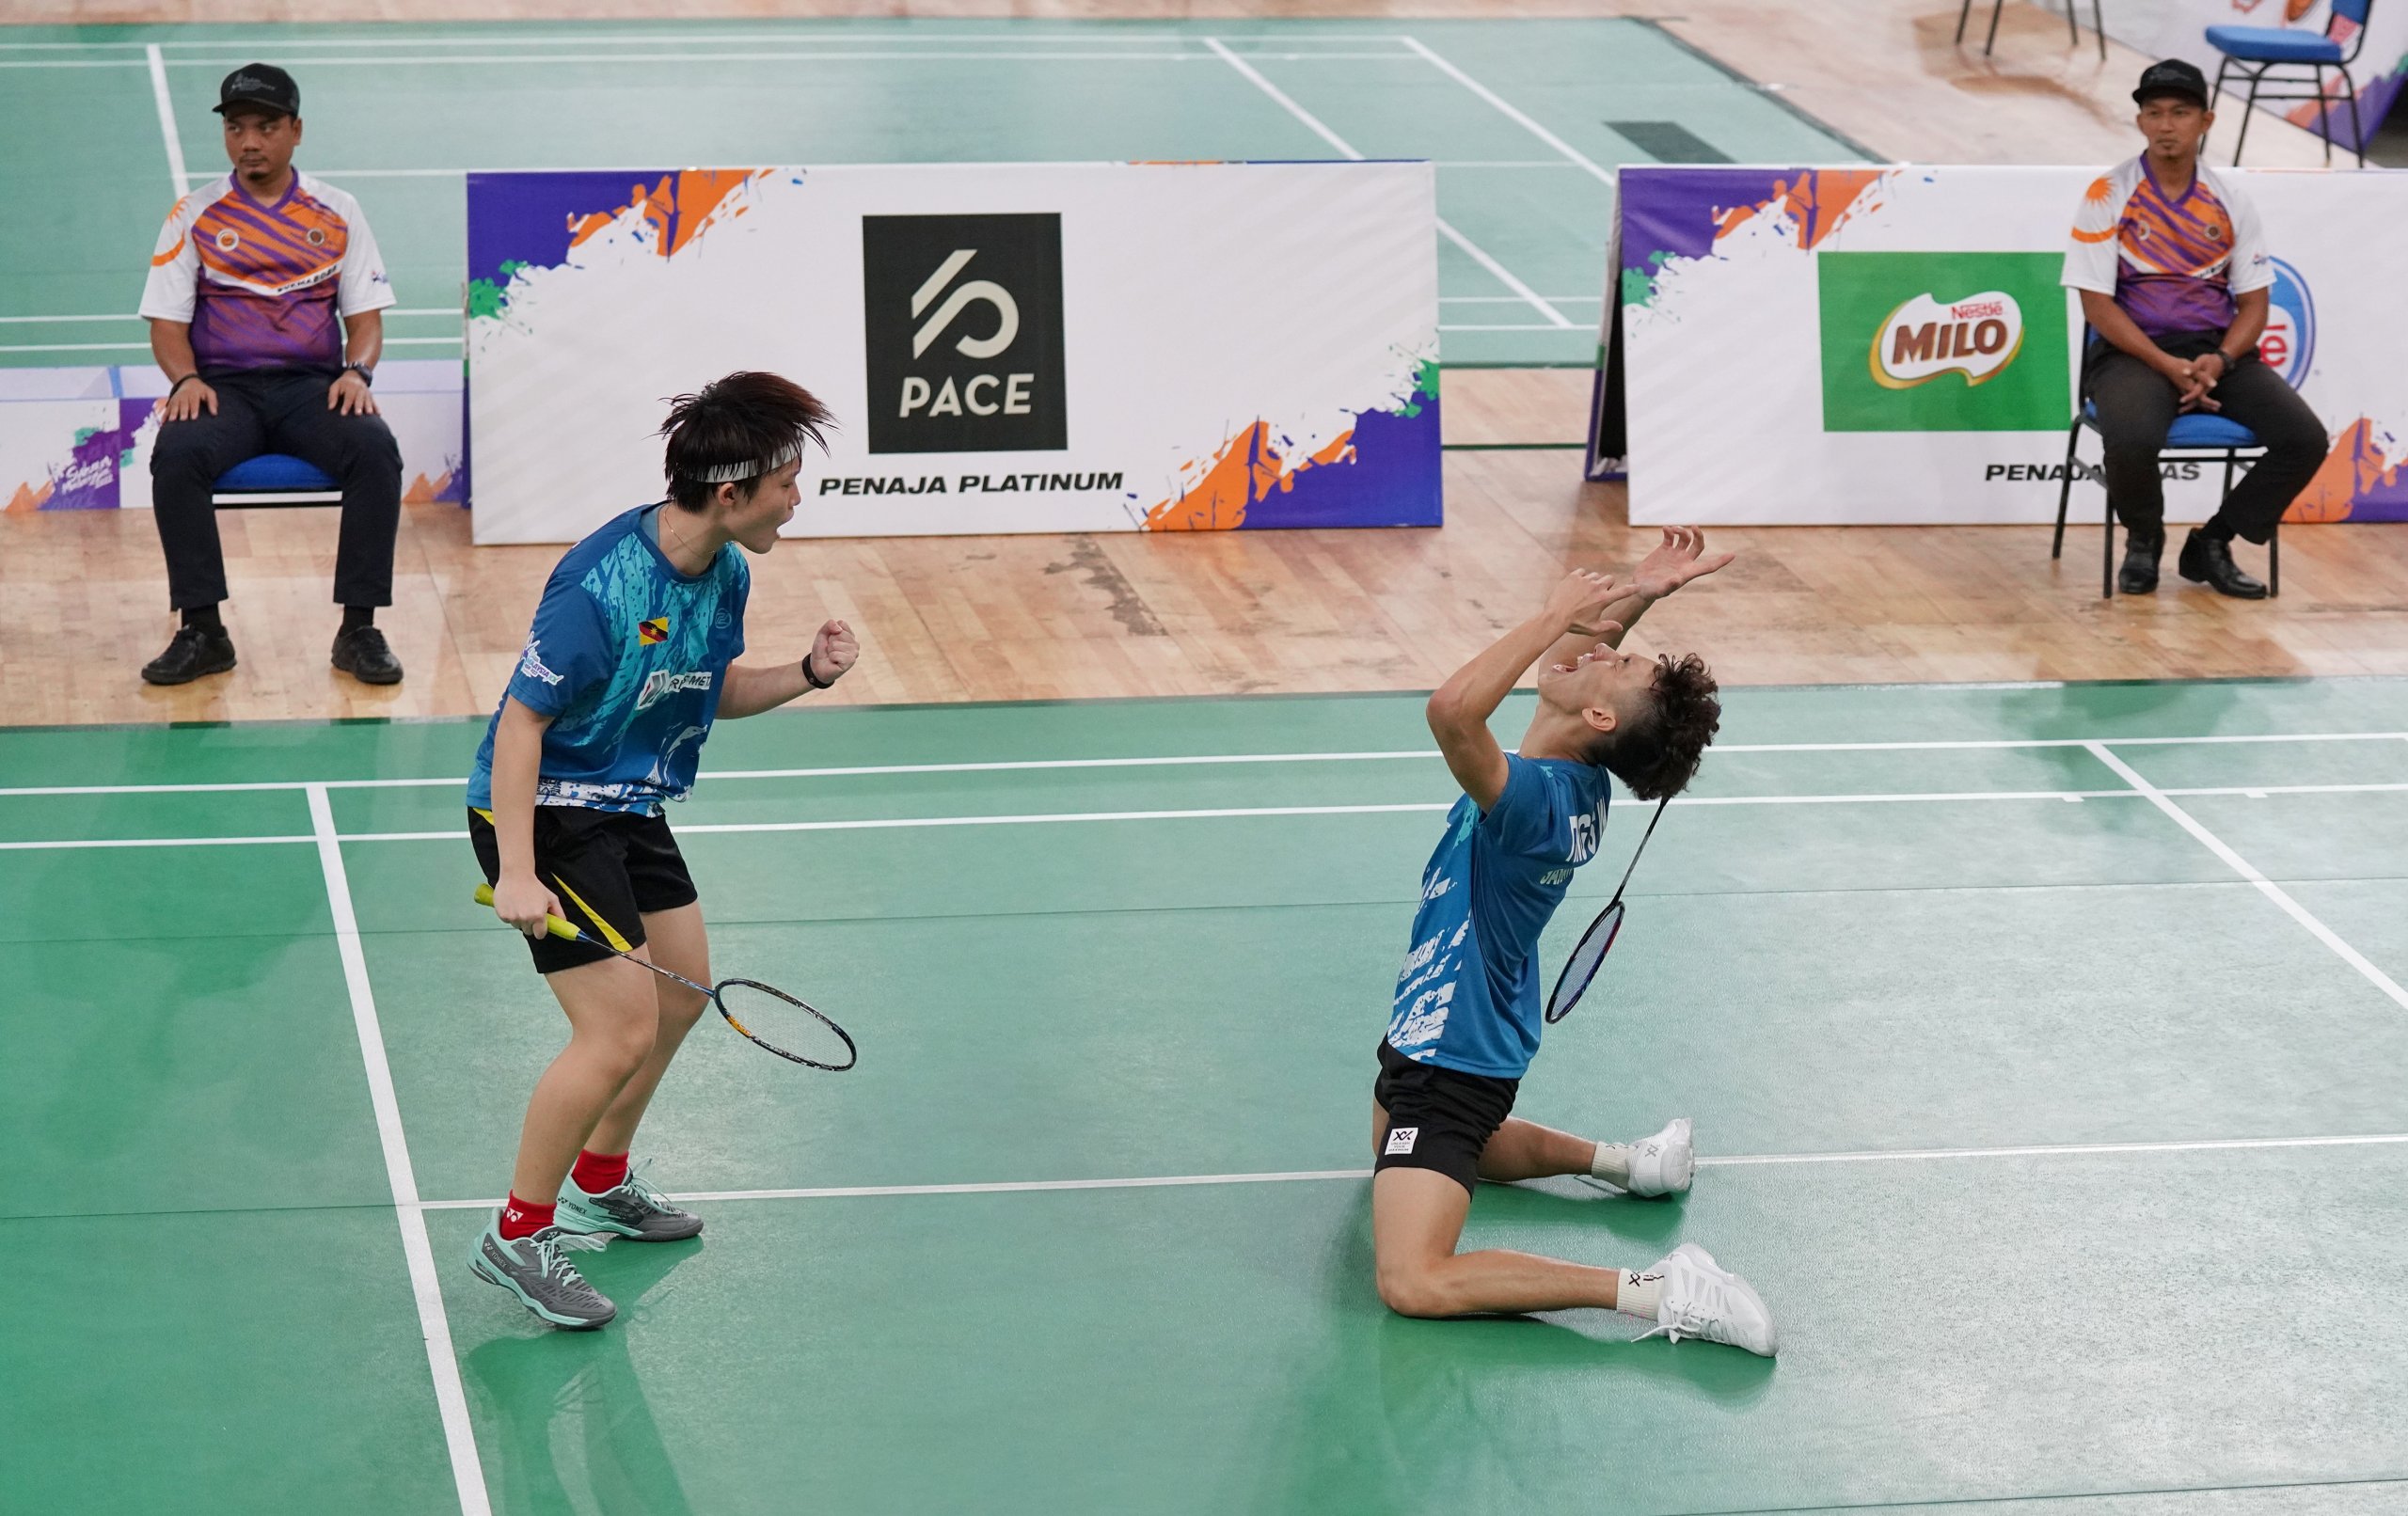 sukma-owen-and-ling-ching-deliver-elusive-doubles-medal-in-badminton-borneo-post-online